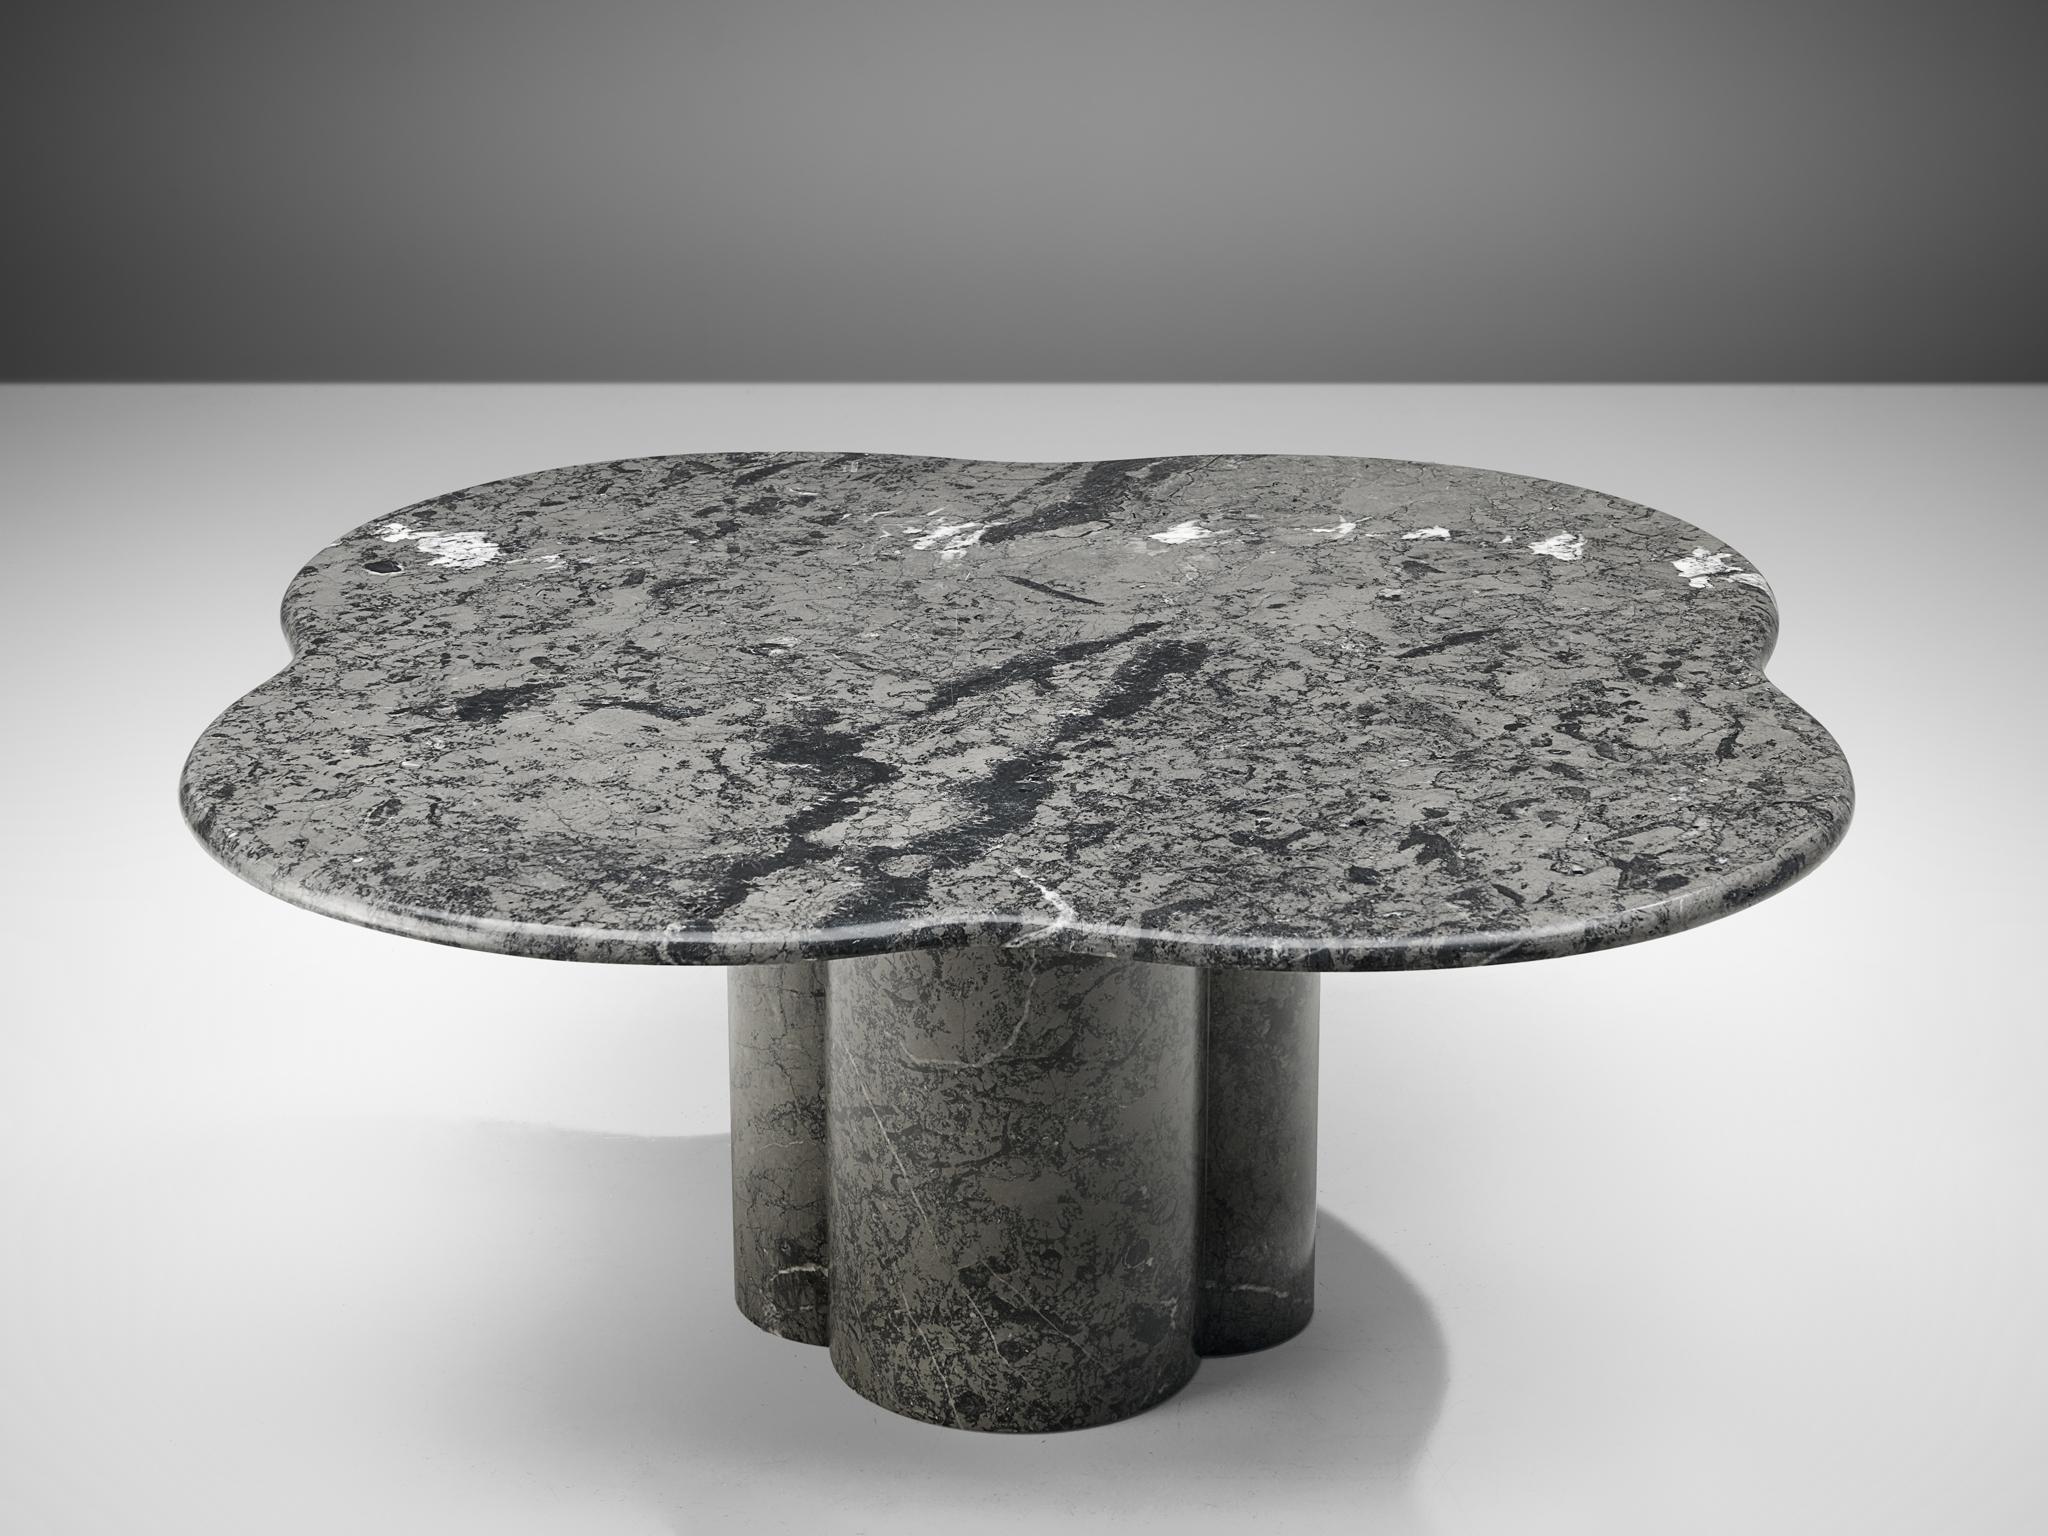 Coffee table, grey marble, Europe, 1970s

A Postmodern cocktail table with a clover shaped tabletop with rounded edges. It shows a variety of marble veins in tones of grey and black. The biomorphic shaped top rests on a pedestal foot that echoes